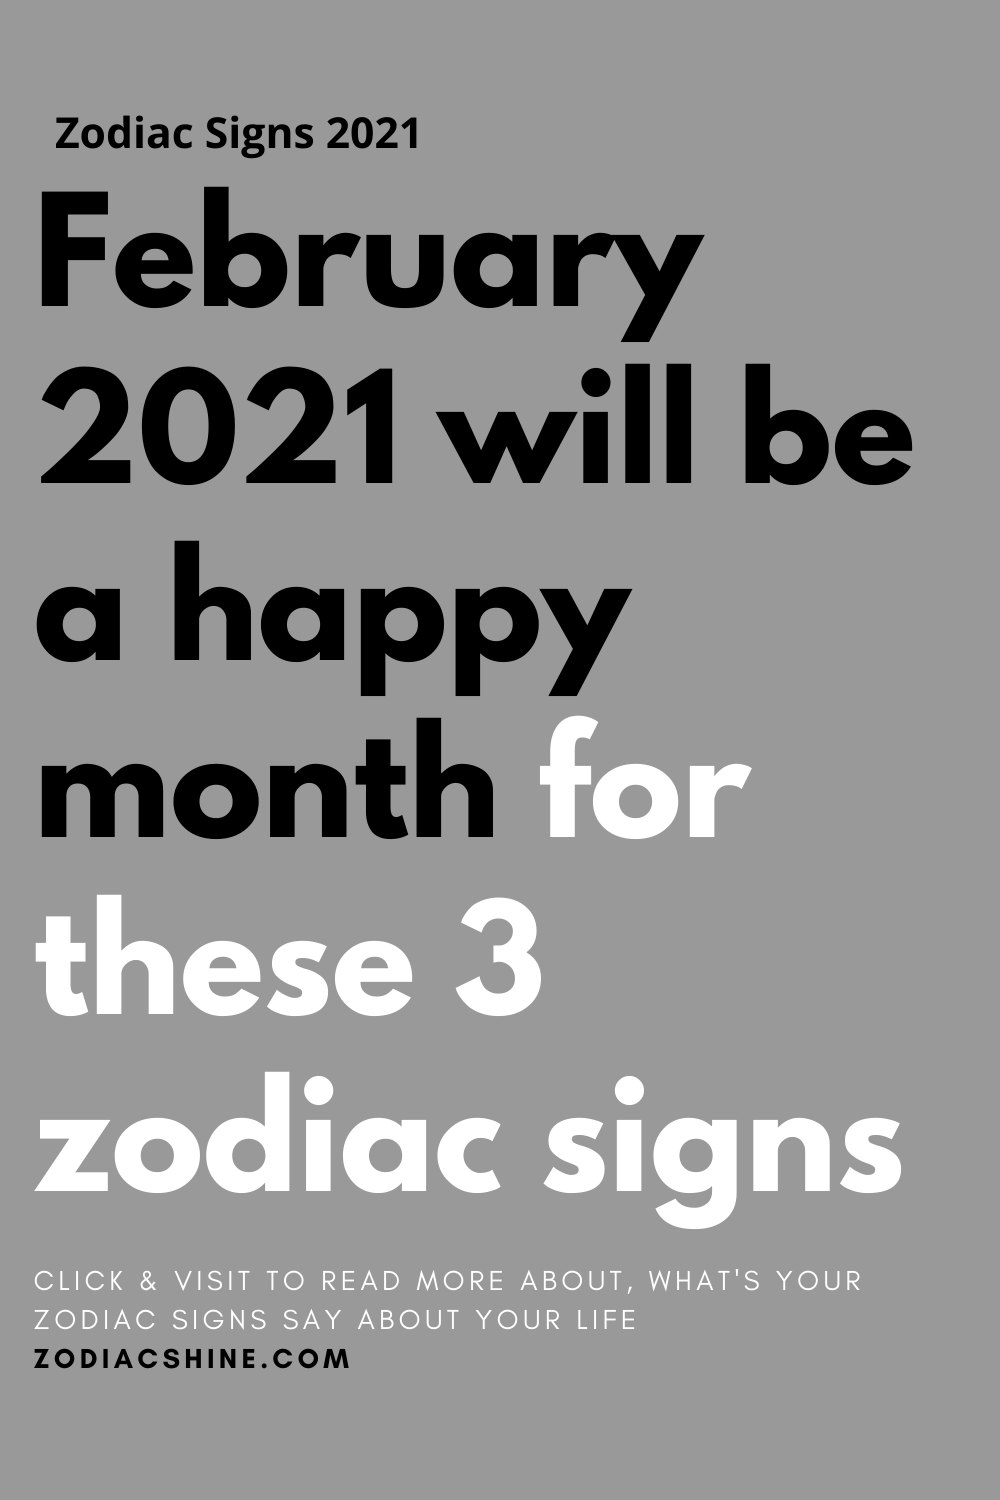 February 2021 will be a happy month for these 3 zodiac signs